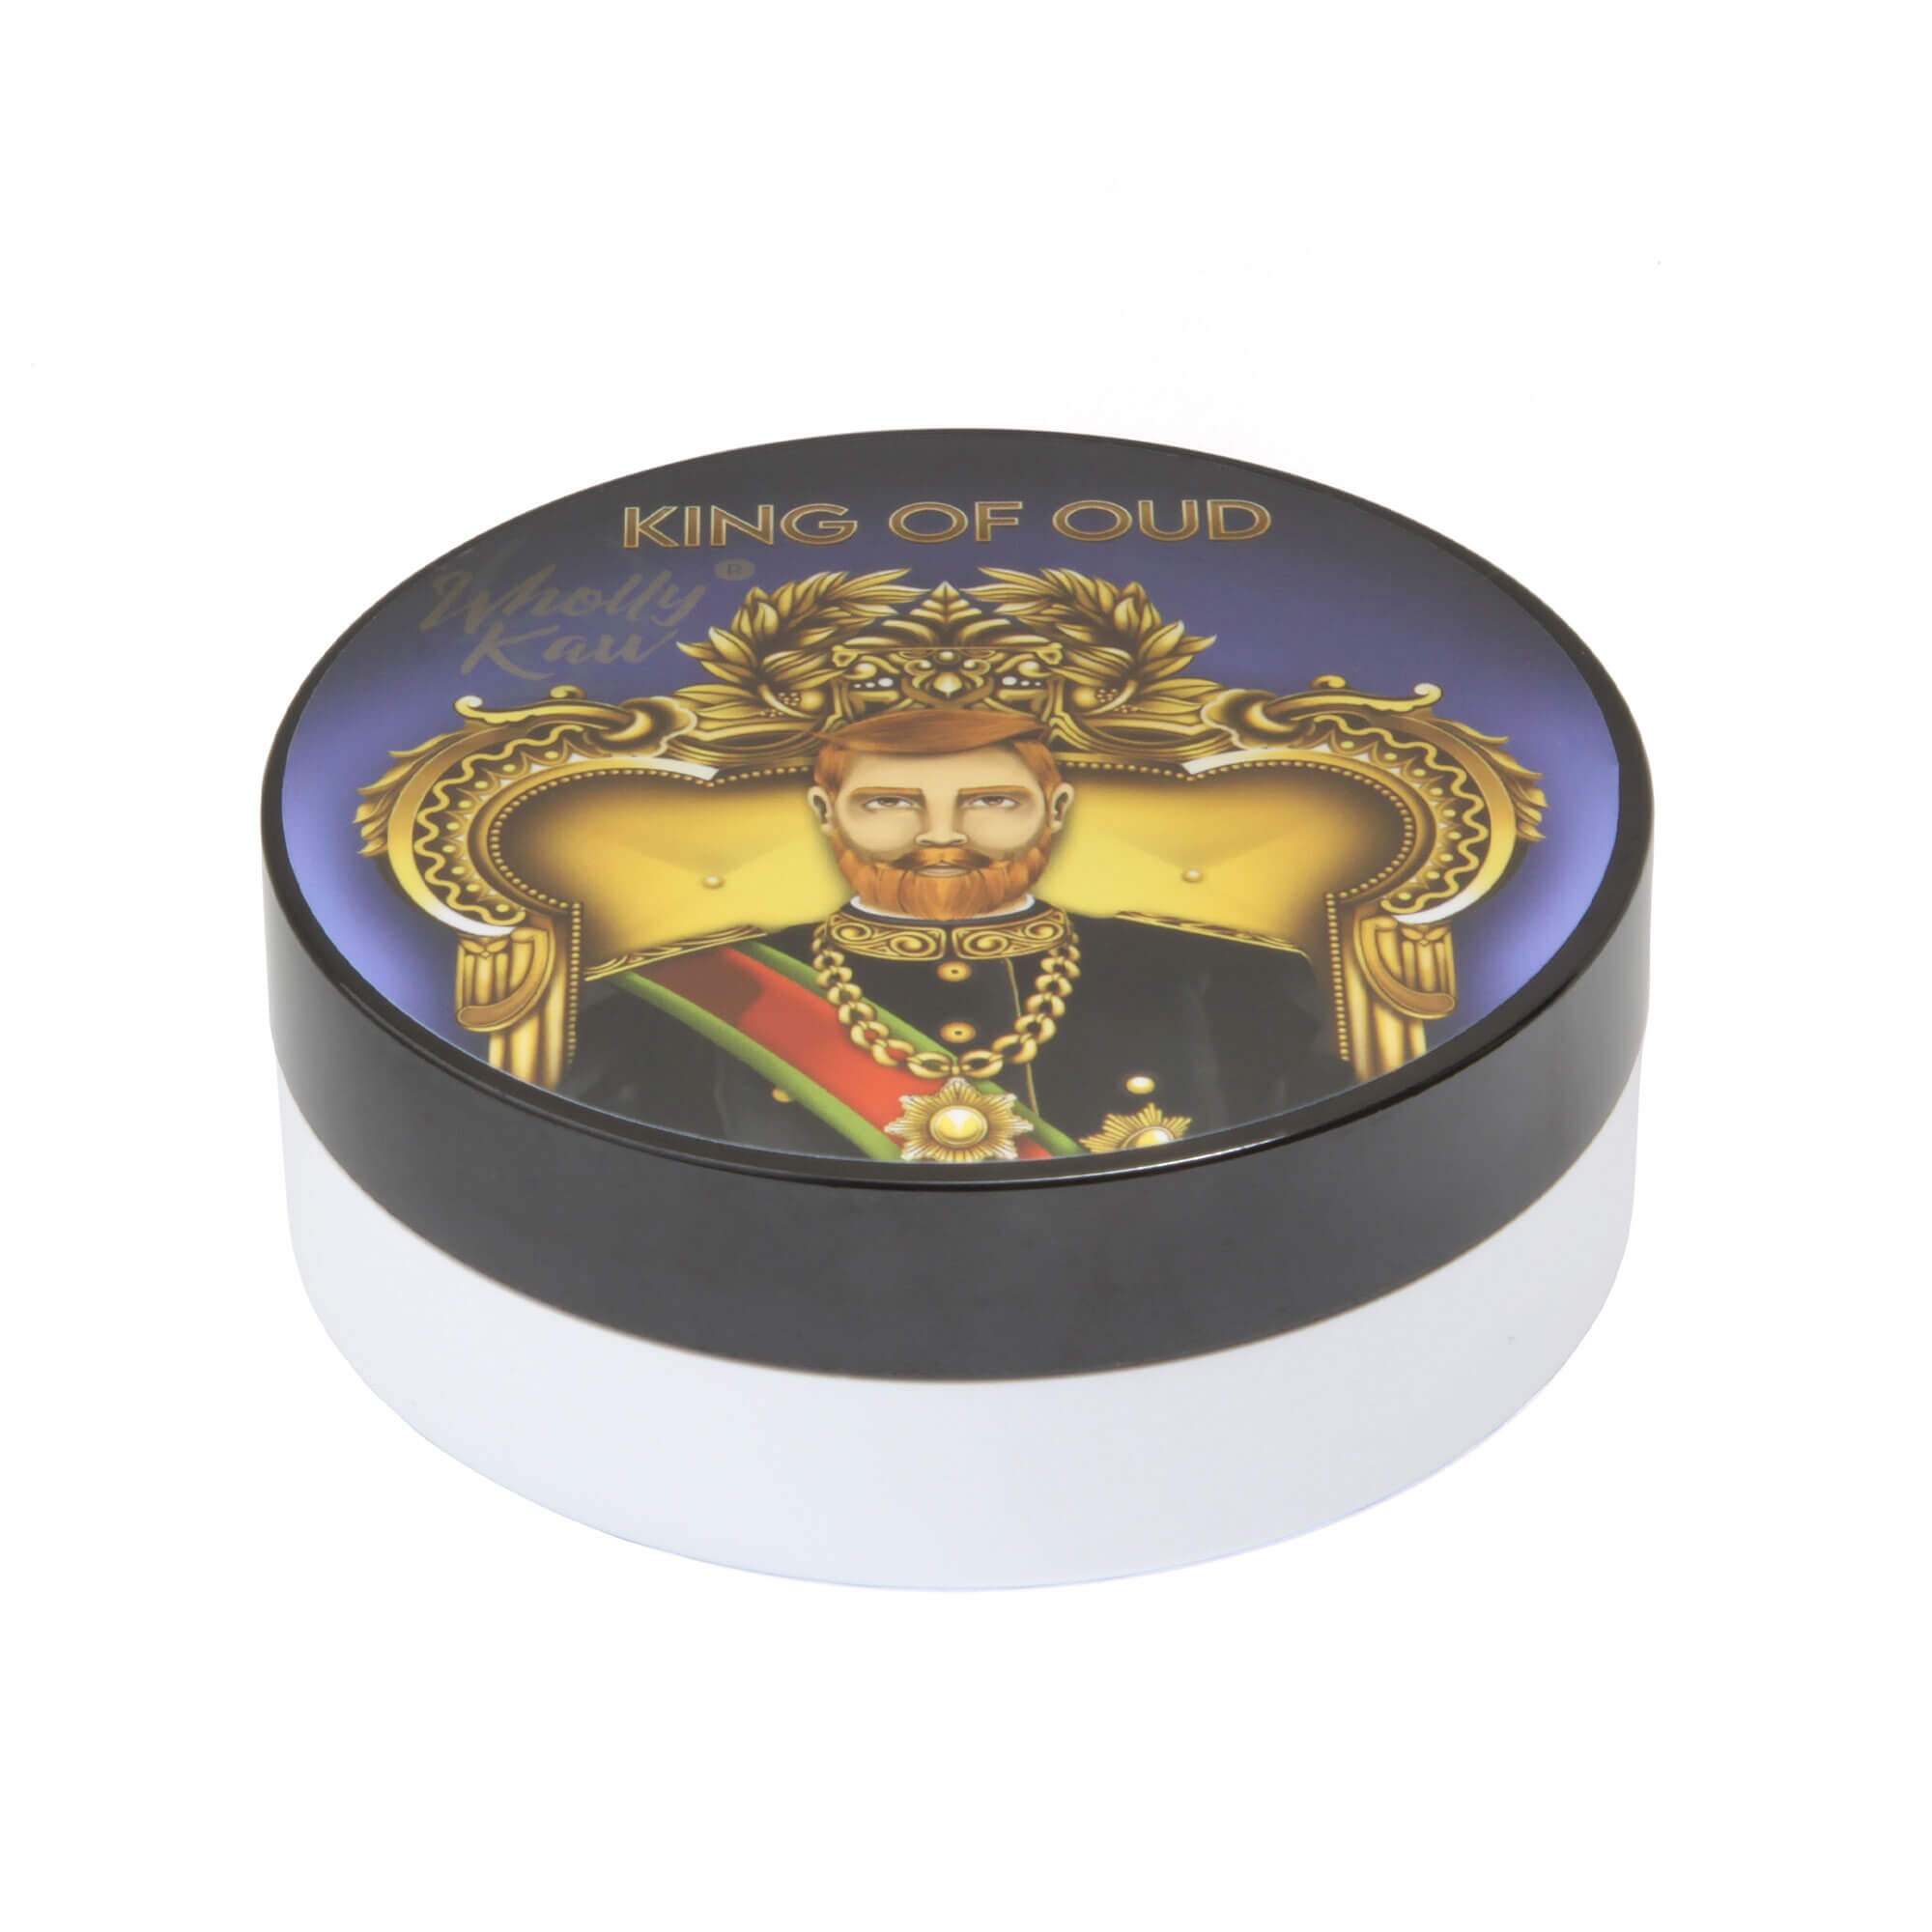 Wholly Kaw King Of Oud Shaving Soap